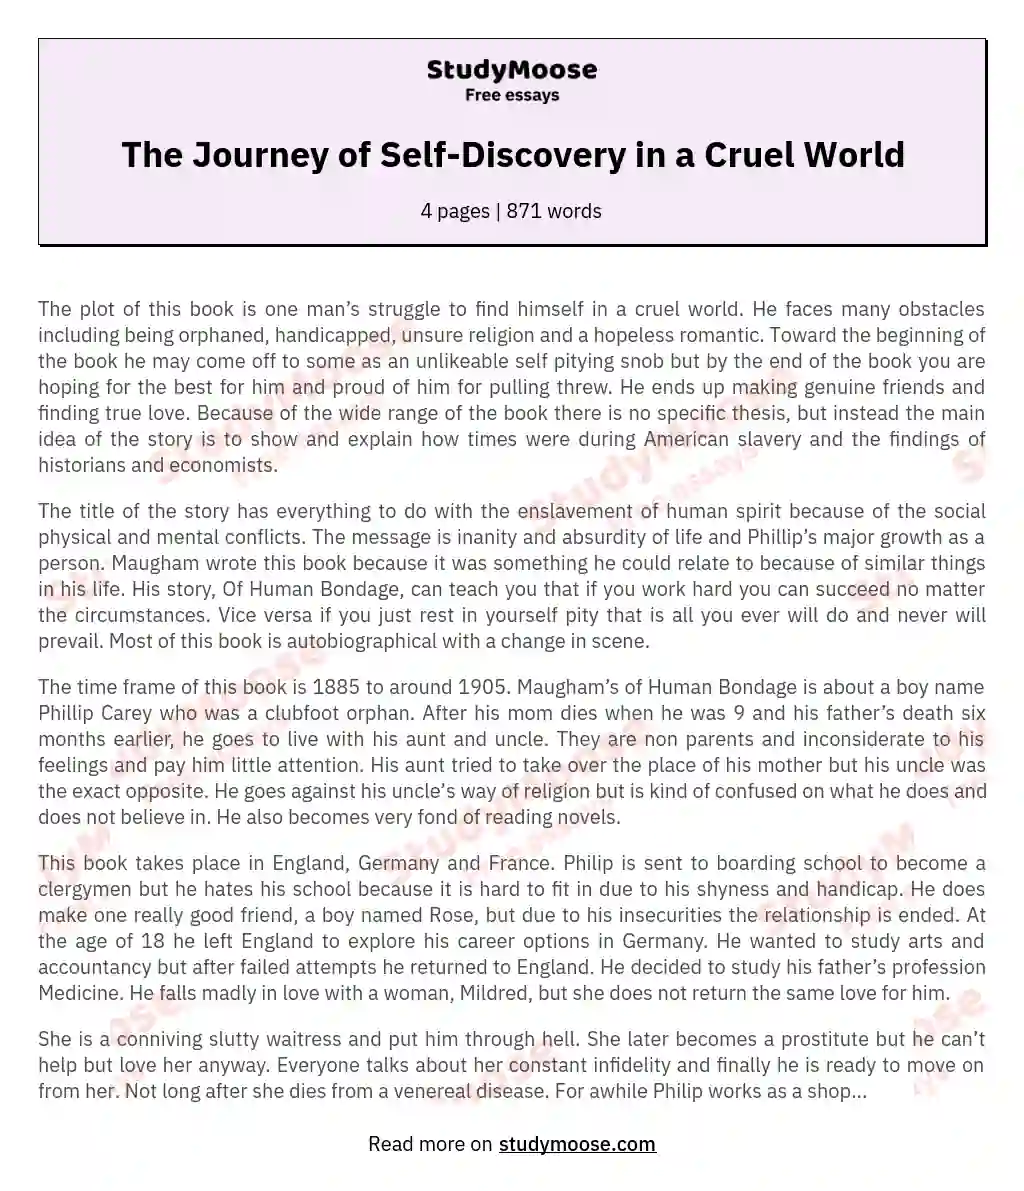 The Journey of Self-Discovery in a Cruel World essay